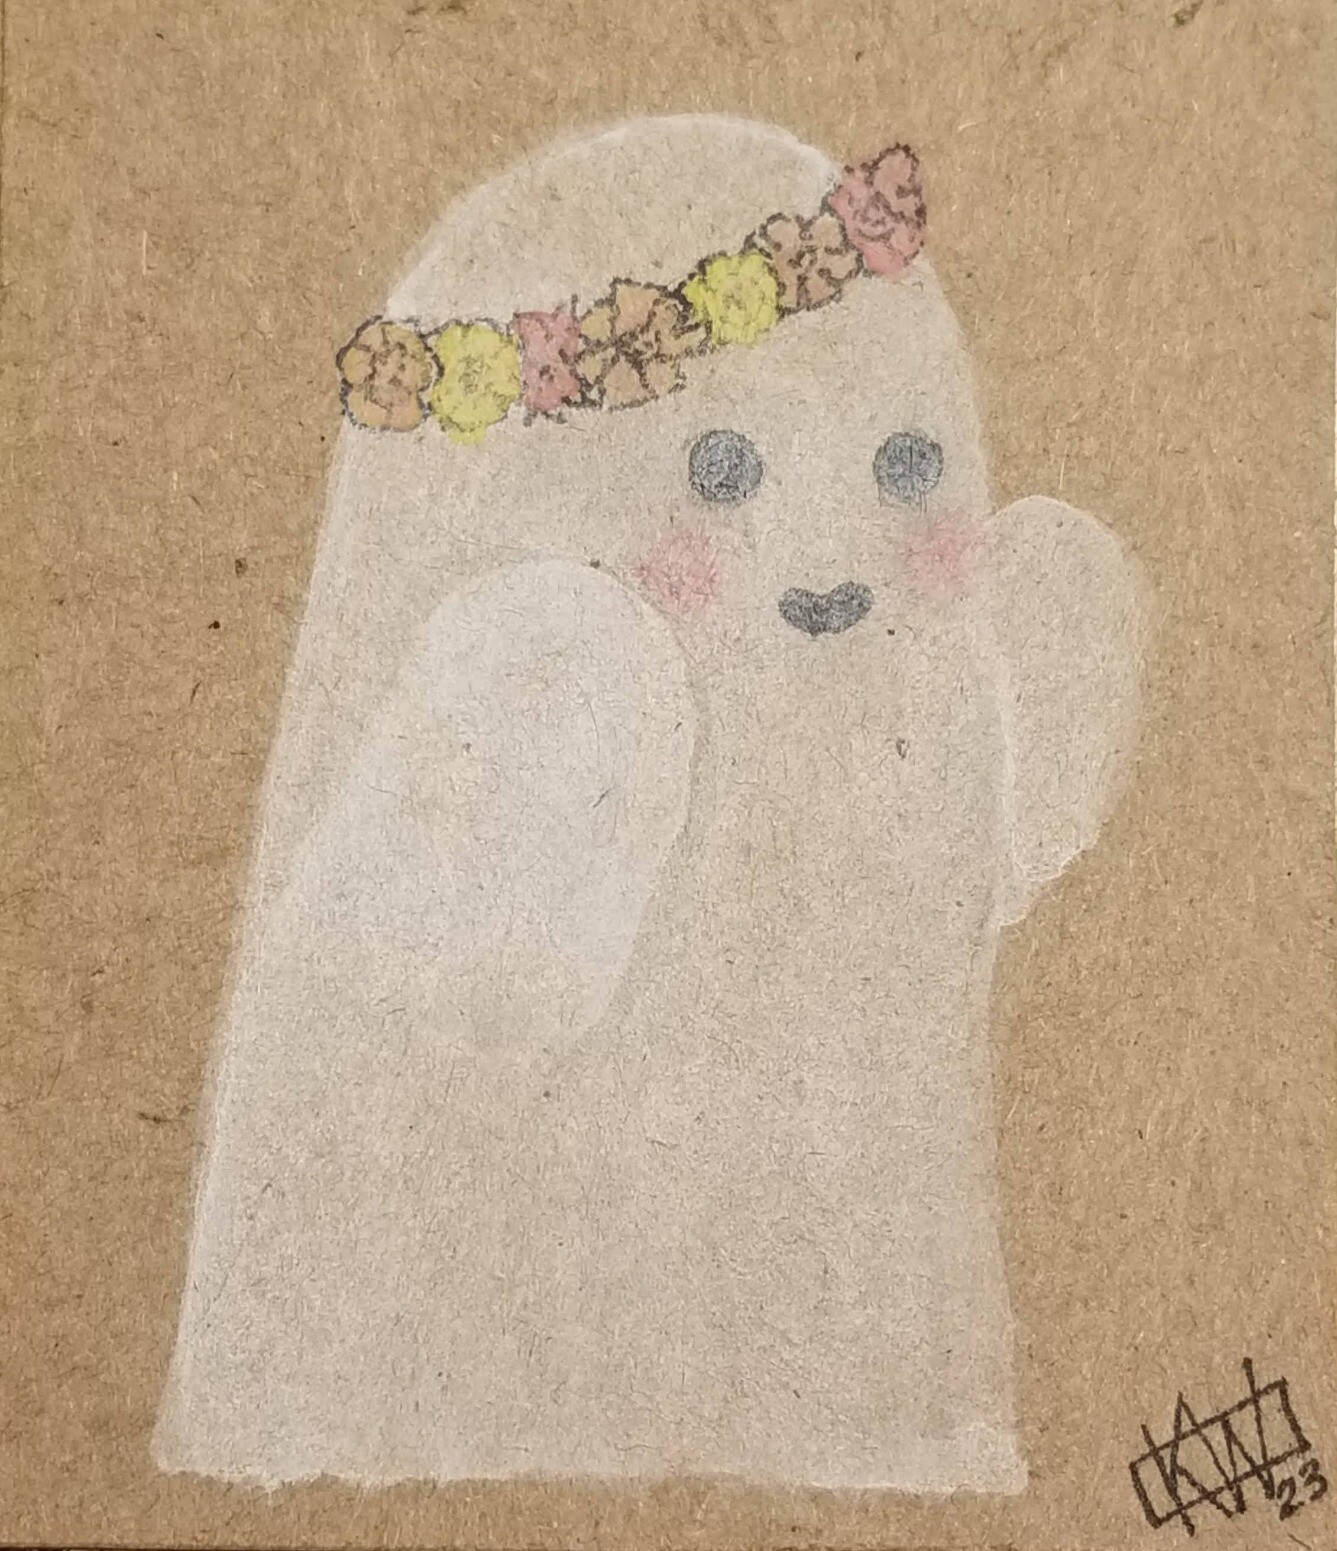 Watercolor & ink on brown cardboard. A smiling, blushing ghost is wearing a flower crown!